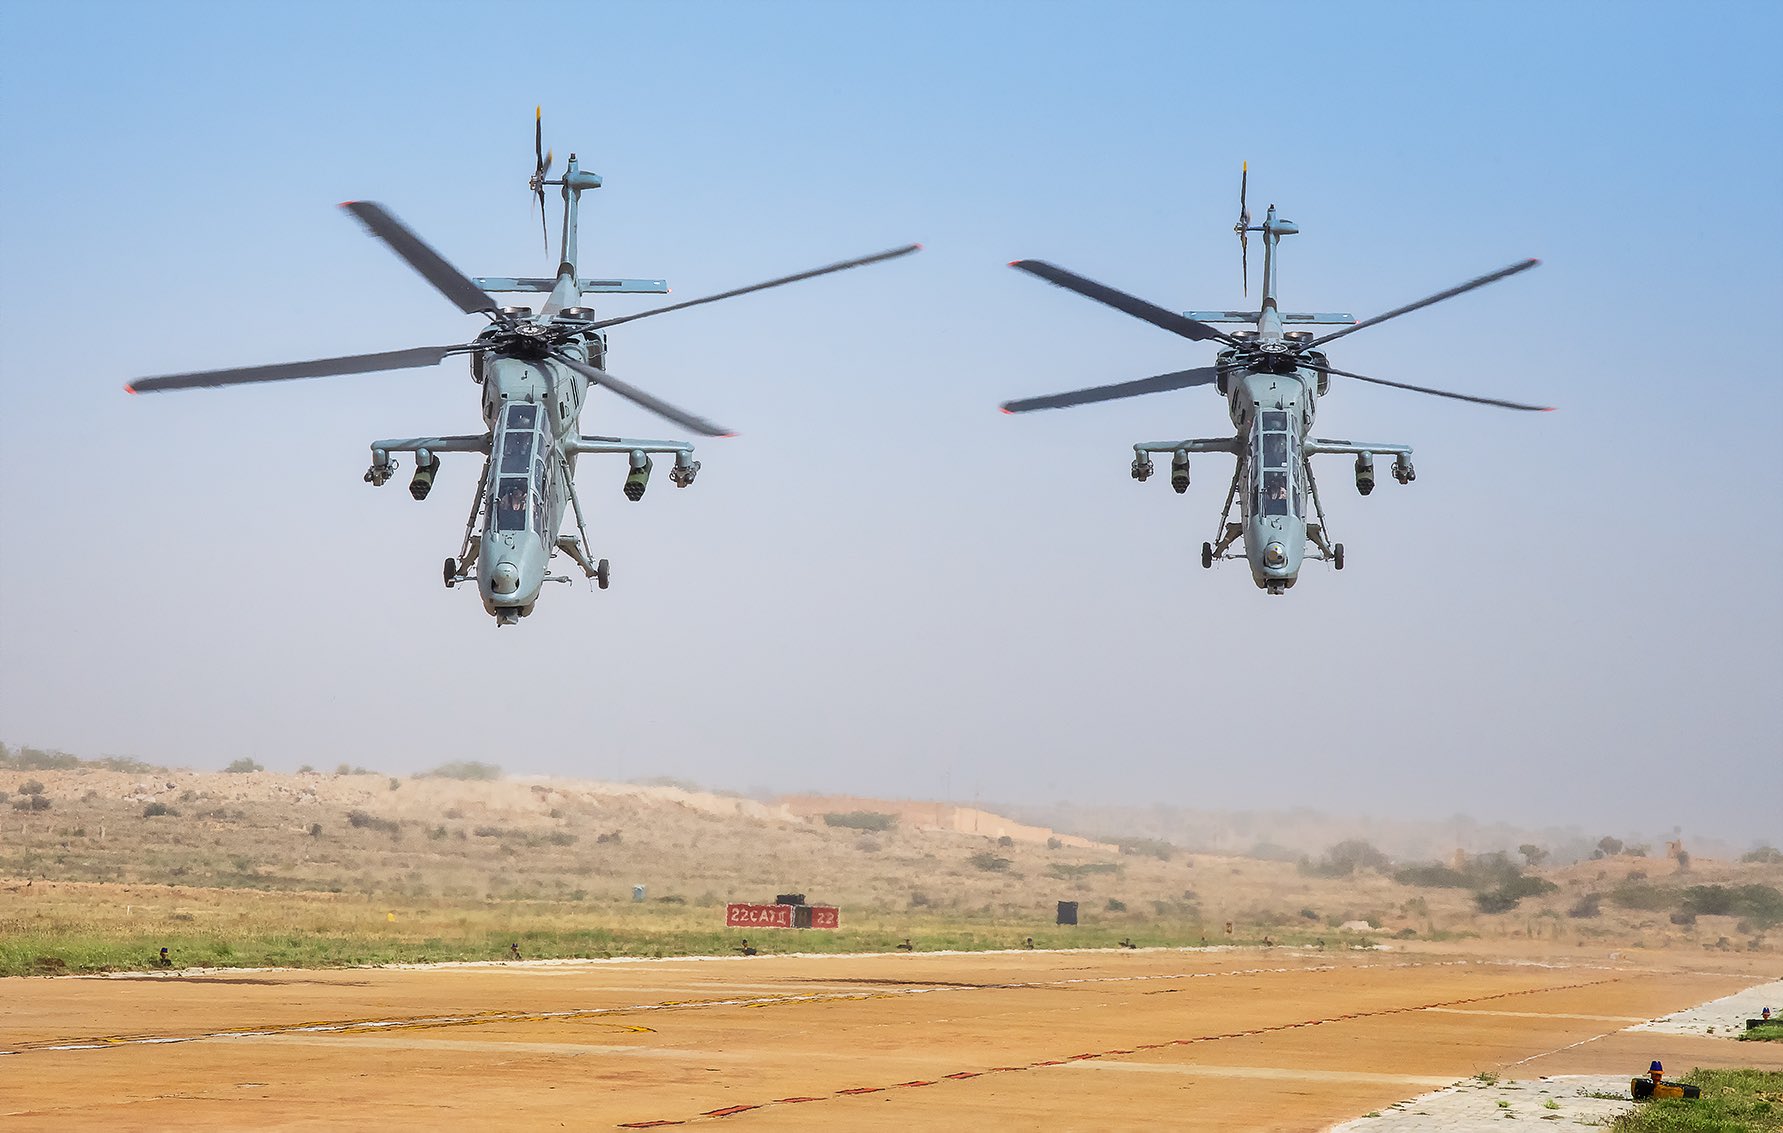 India' indigenously developed Light Combat Helicopters